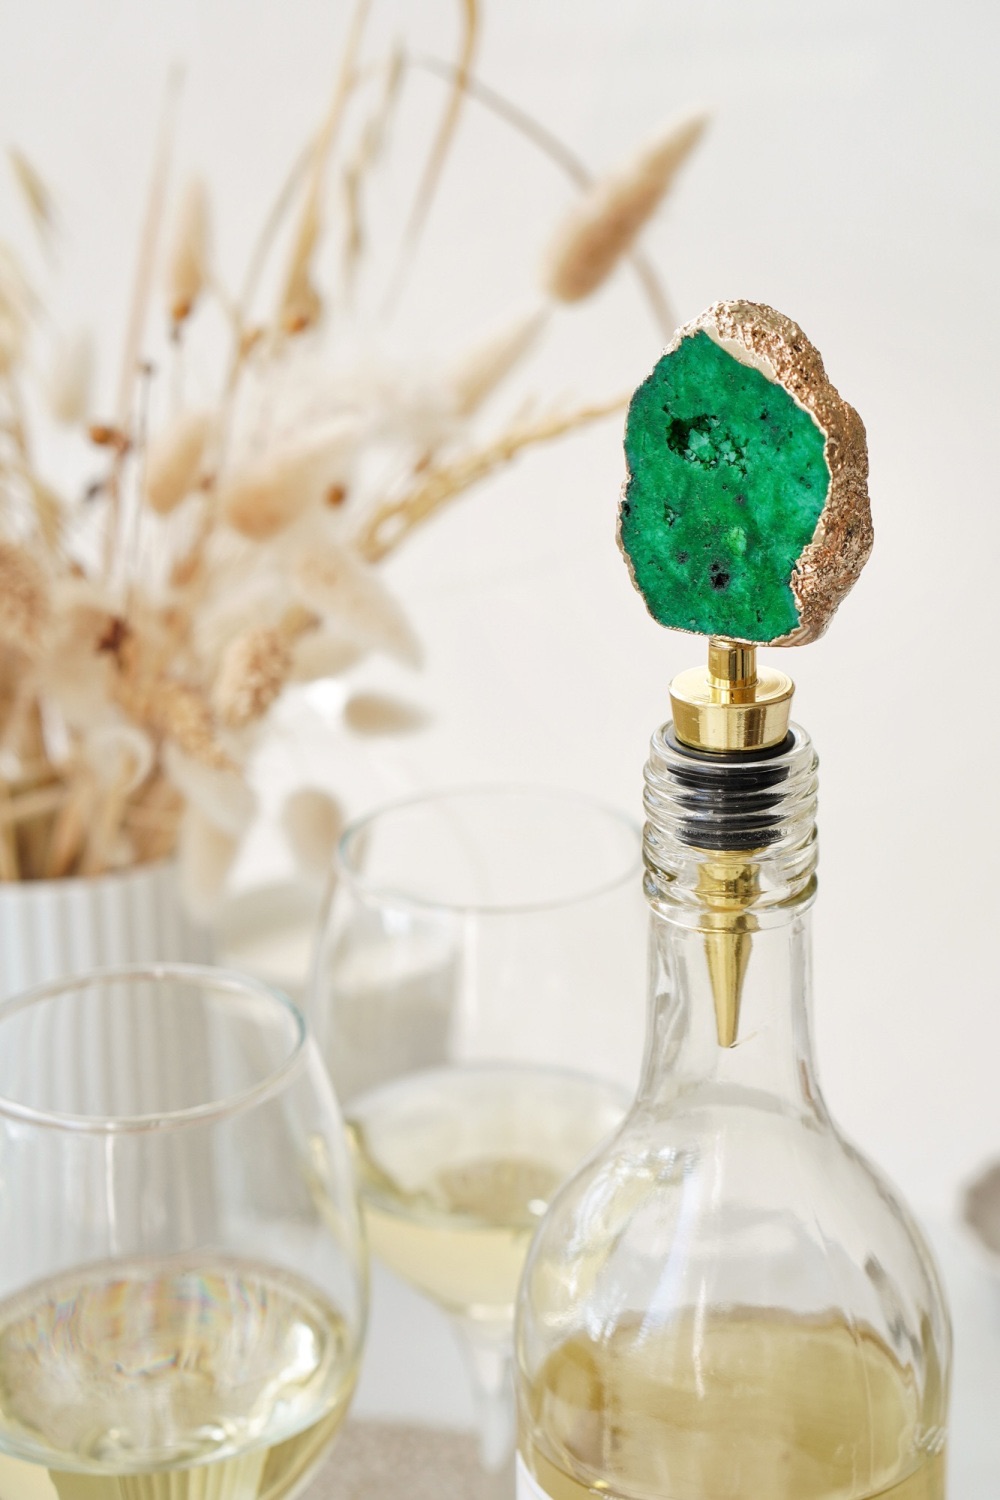 Green Agate Crystal Bottle Stopper by Xander Kostroma